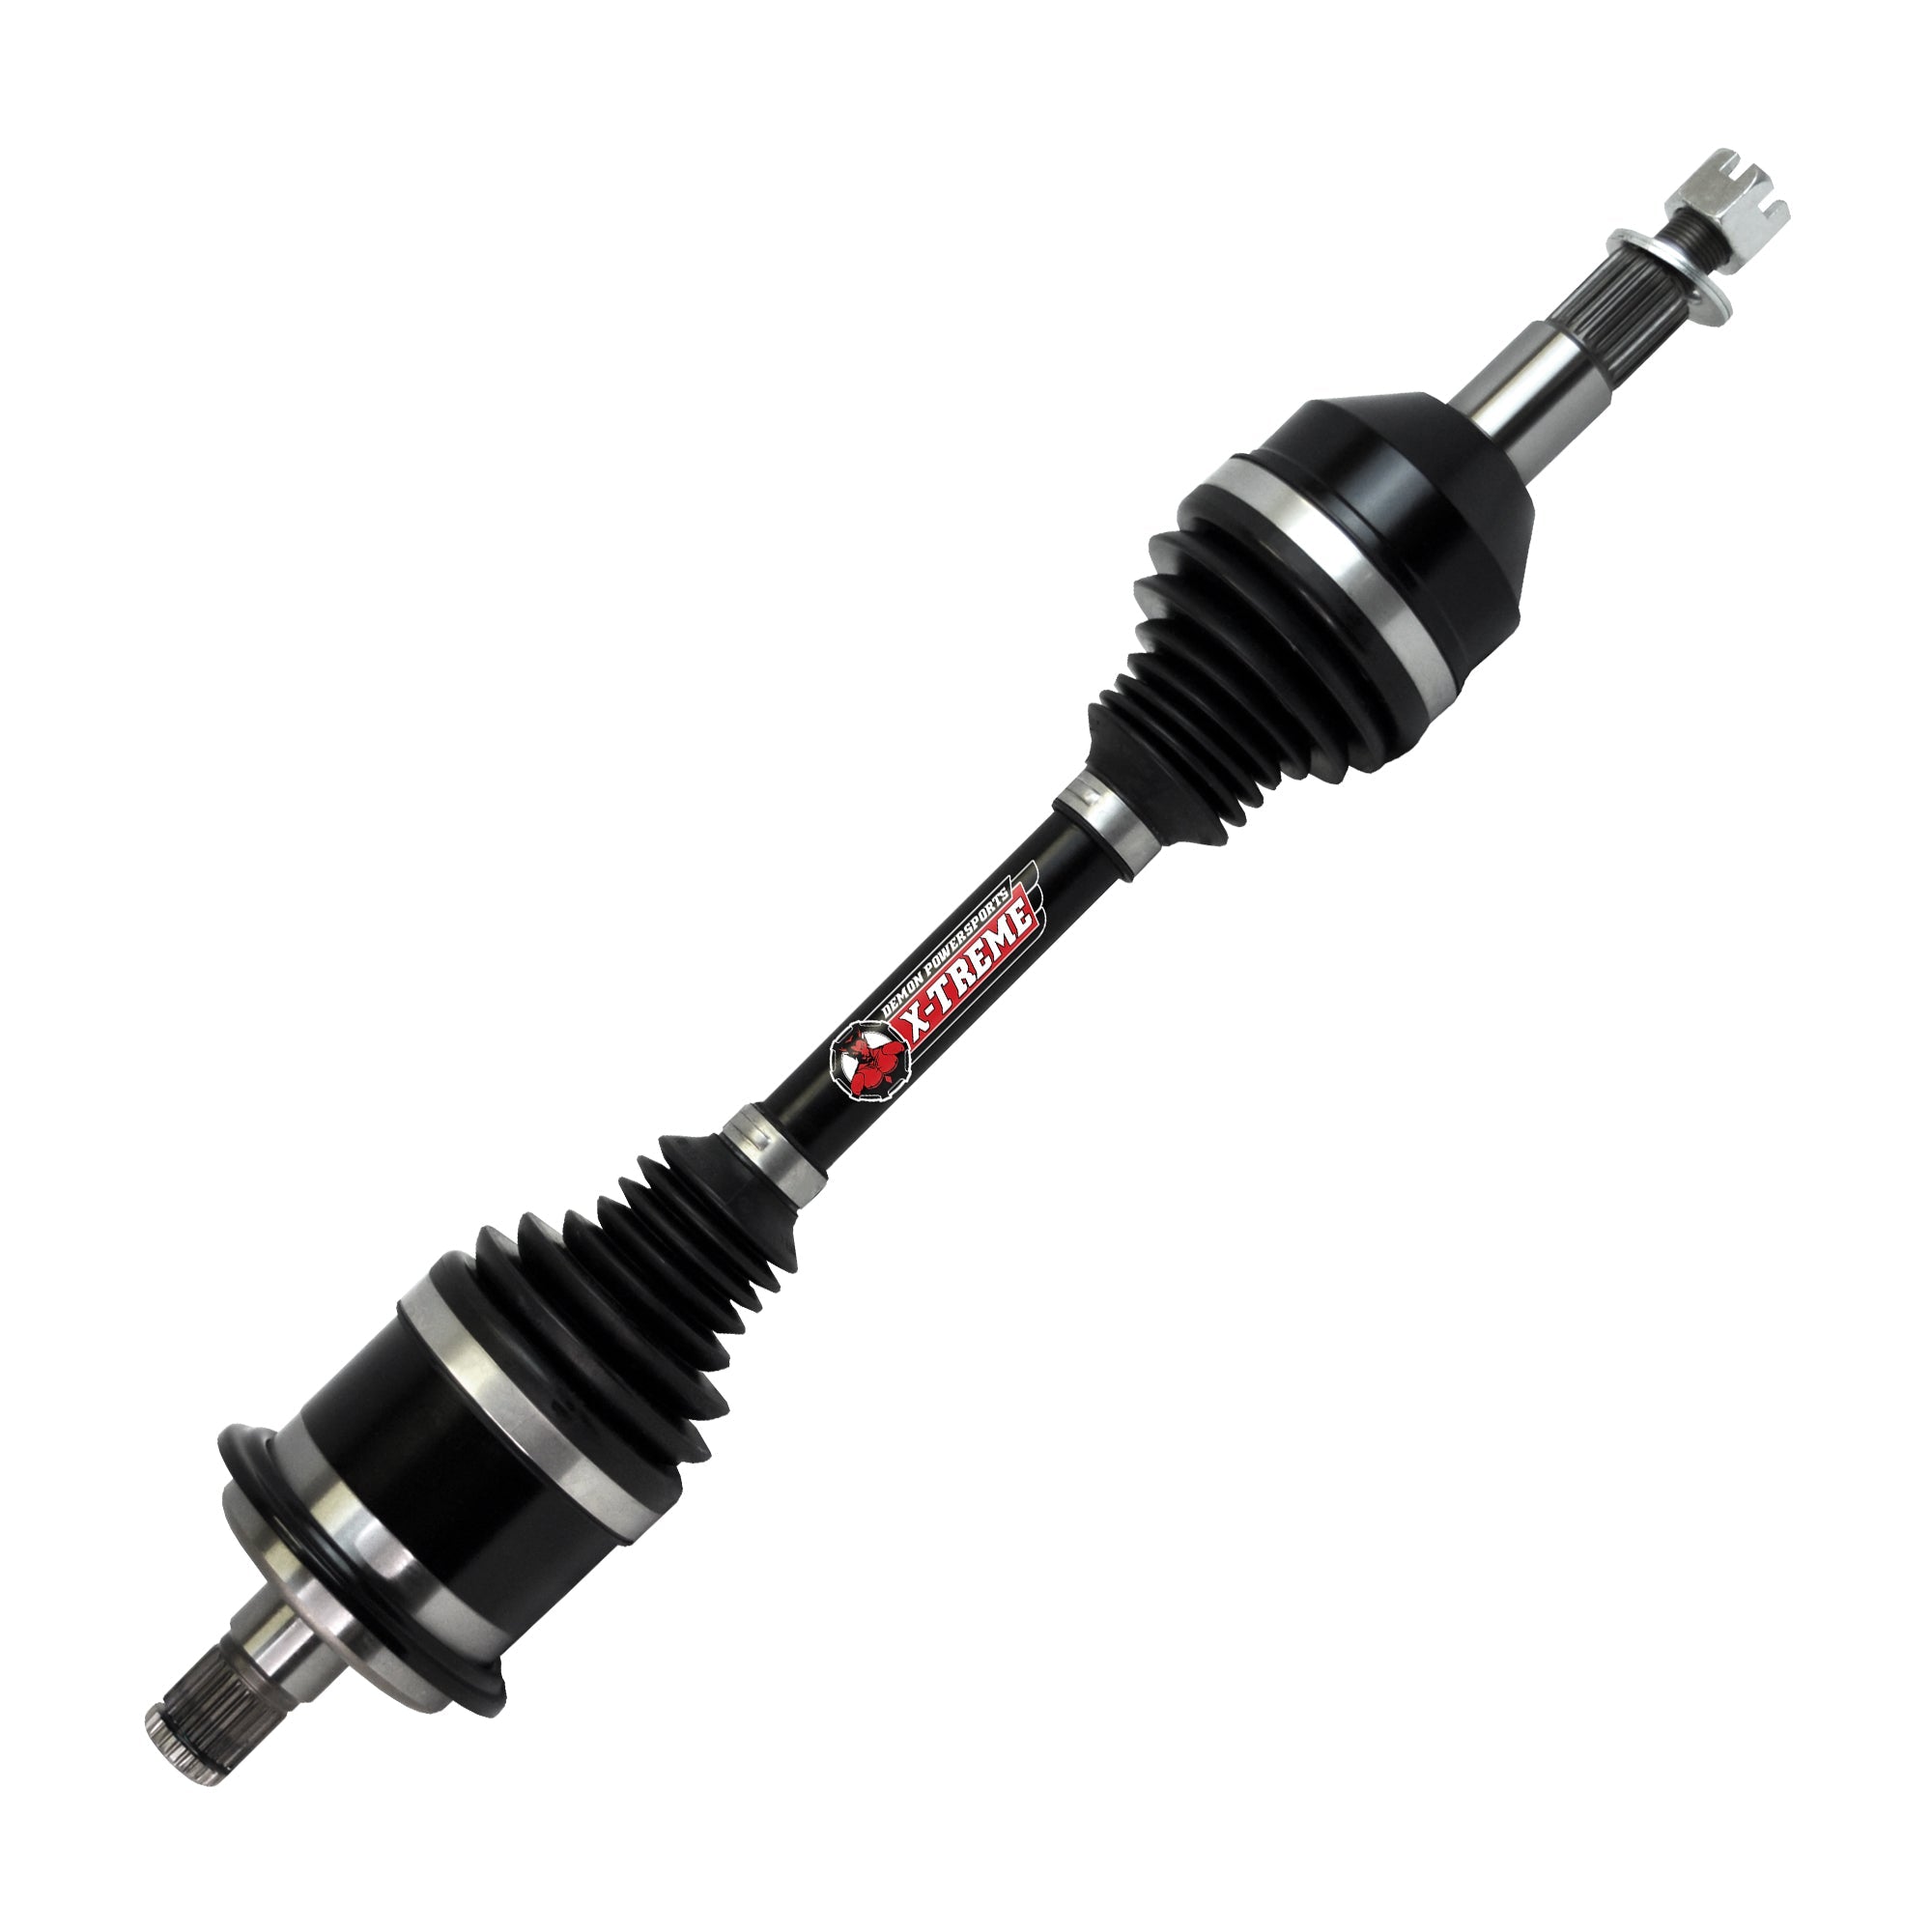 Xtreme Heavy Duty Axle for Can Am Outlander L570 